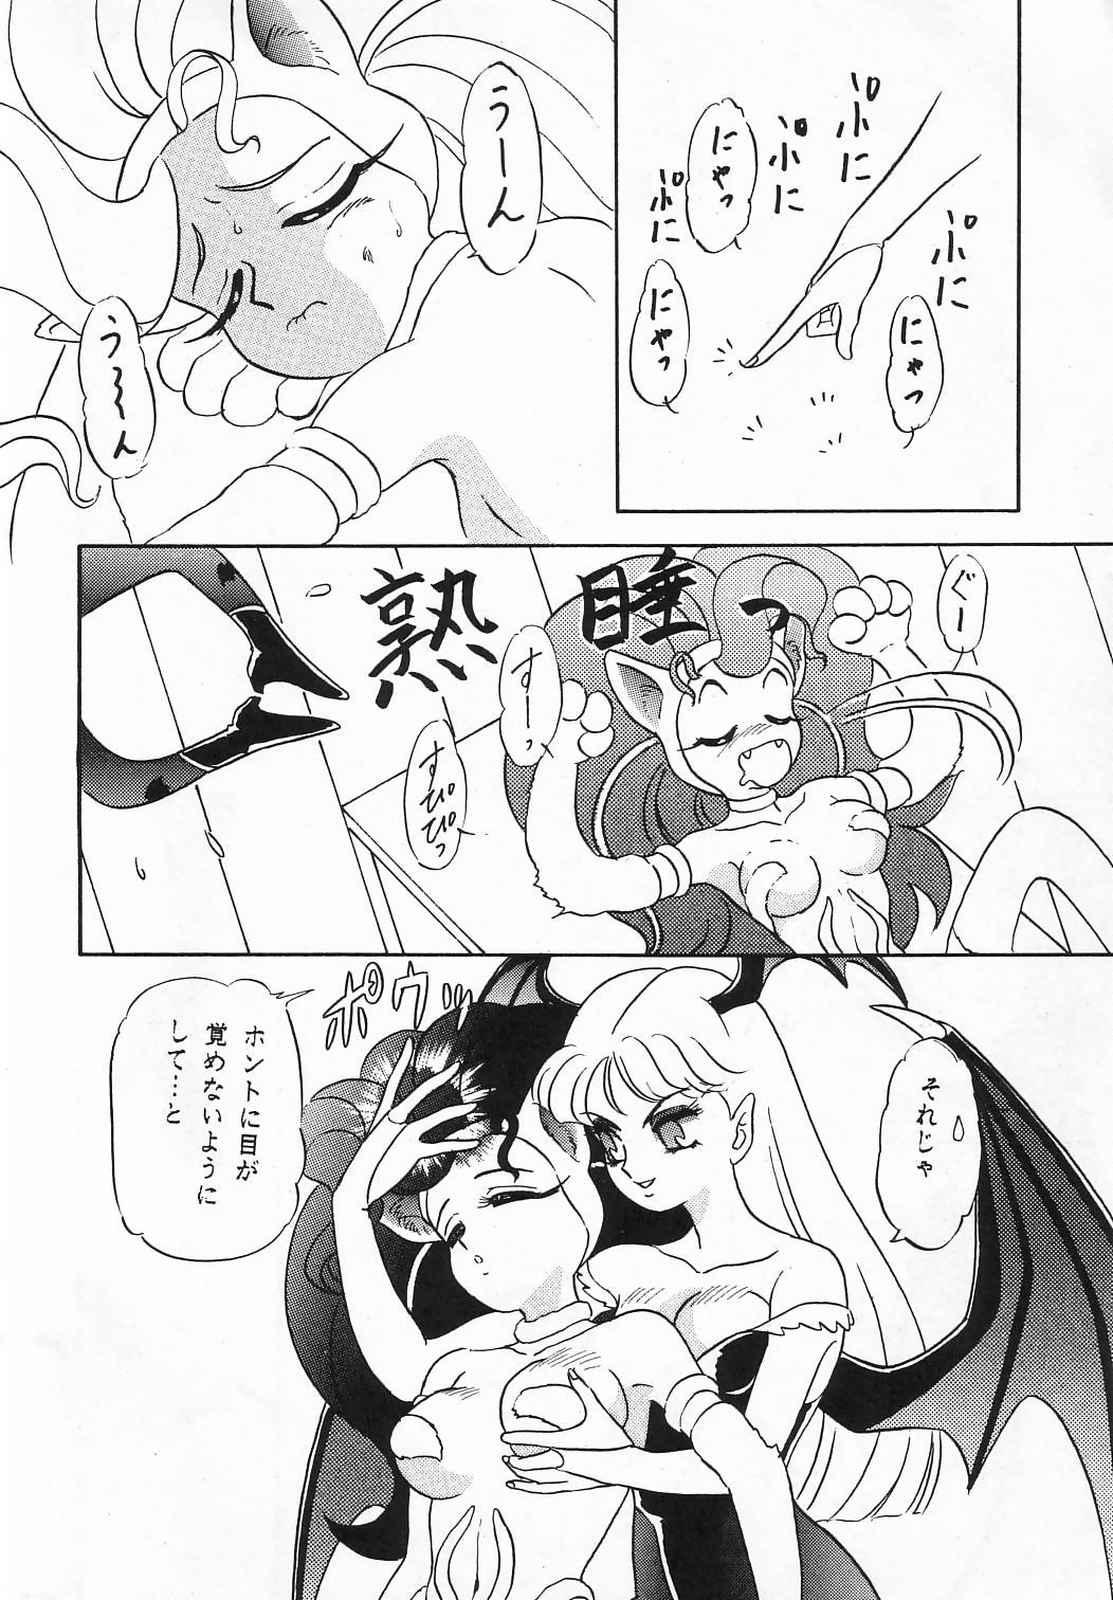 Deflowered Lunch Box 10 - Lunch Time 2 - Sailor moon Darkstalkers Amateur - Page 8